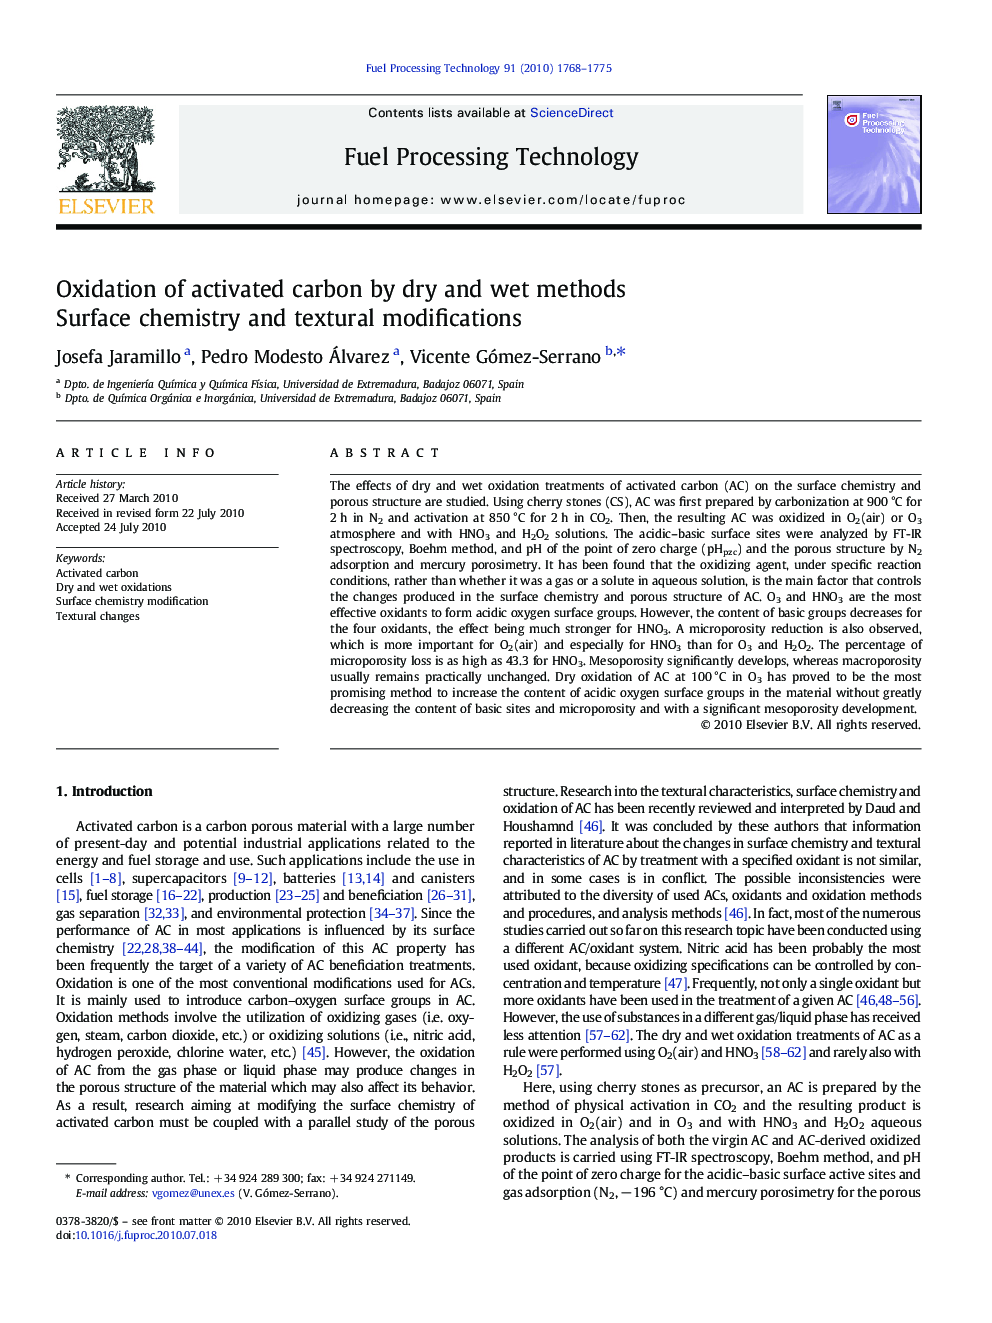 Oxidation of activated carbon by dry and wet methods: Surface chemistry and textural modifications